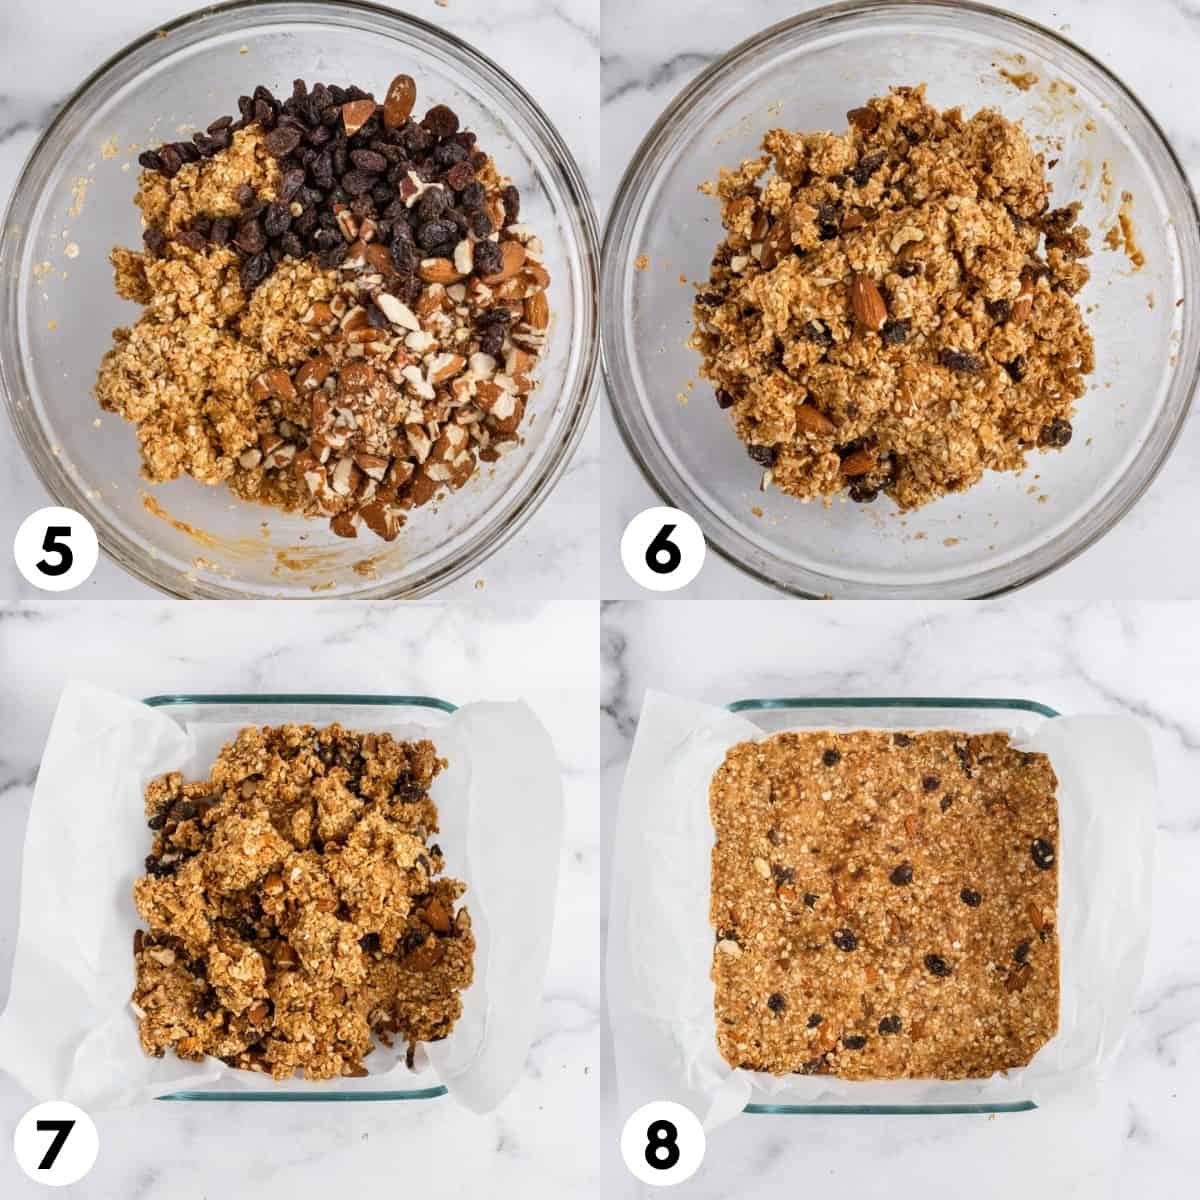 Trail mix bar mixture in bowl and spread in baking pan.